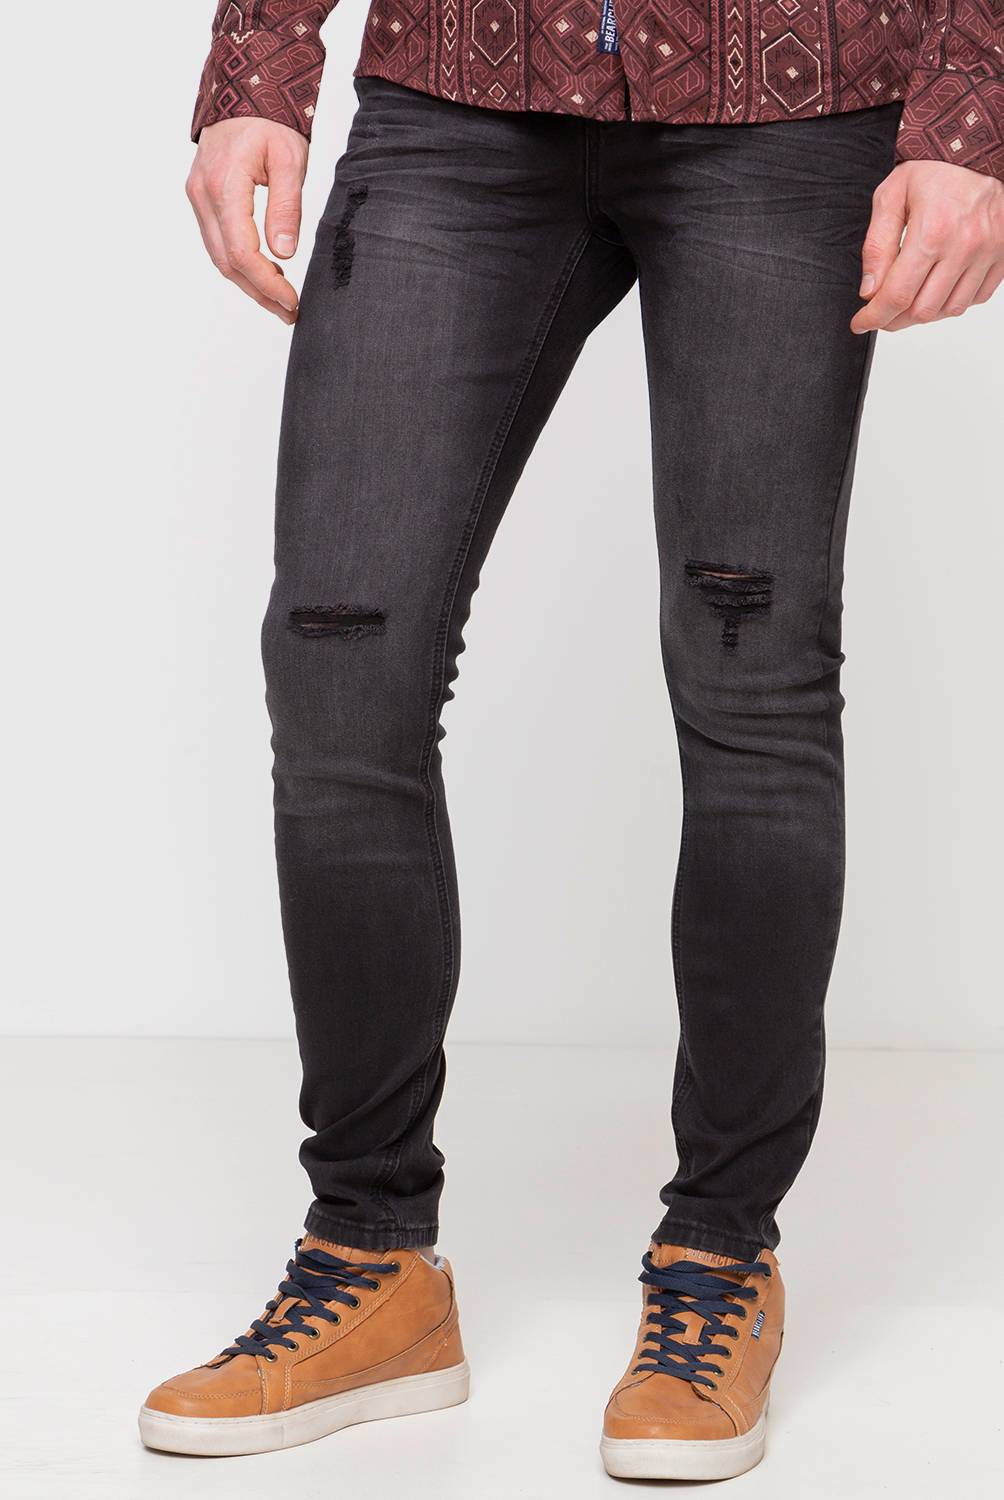 Bearcliff - Jeans Casual Skinny Fit